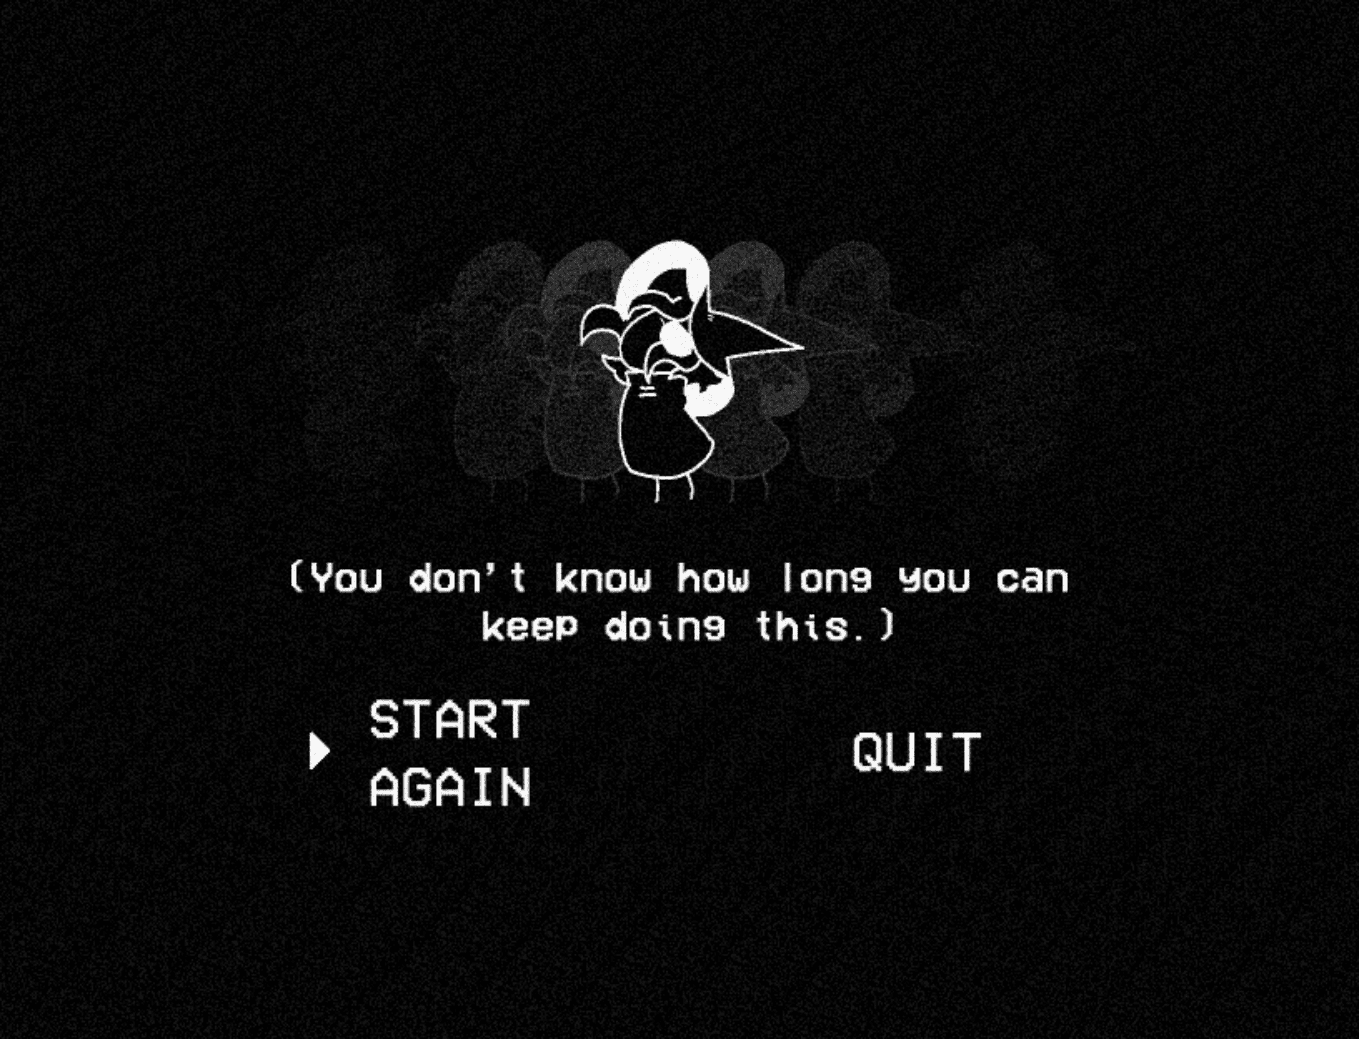 Game over screen that says "you don't know how long you can keep doing this"